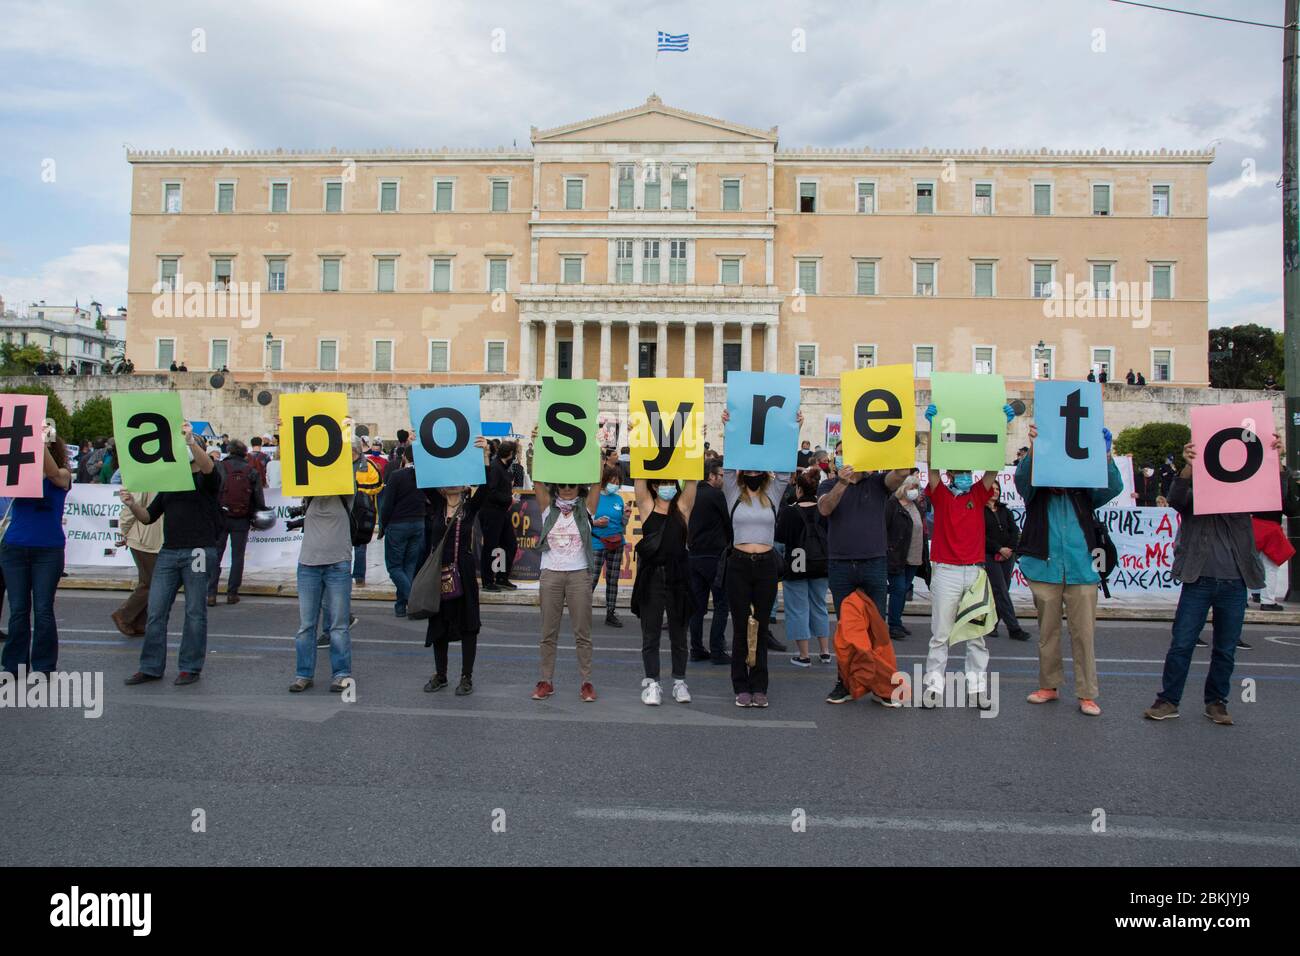 Athens, Greece. 4th May 2020. Protesters hold signs that make the word, '#aposyre to' meaning in greek, 'Take it back' refering to the environmental bill. Protesters hold placards and banners bearing messages such as against oil drilling, mining and wind farms. Hundreds gathered in front of the parliament to demonstrate against the government's environmental draft bill that lifts restrictions and as activists and environmental organizations claim will seriously endanger the environment. Credit: Nikolas Georgiou/Alamy Live News Stock Photo